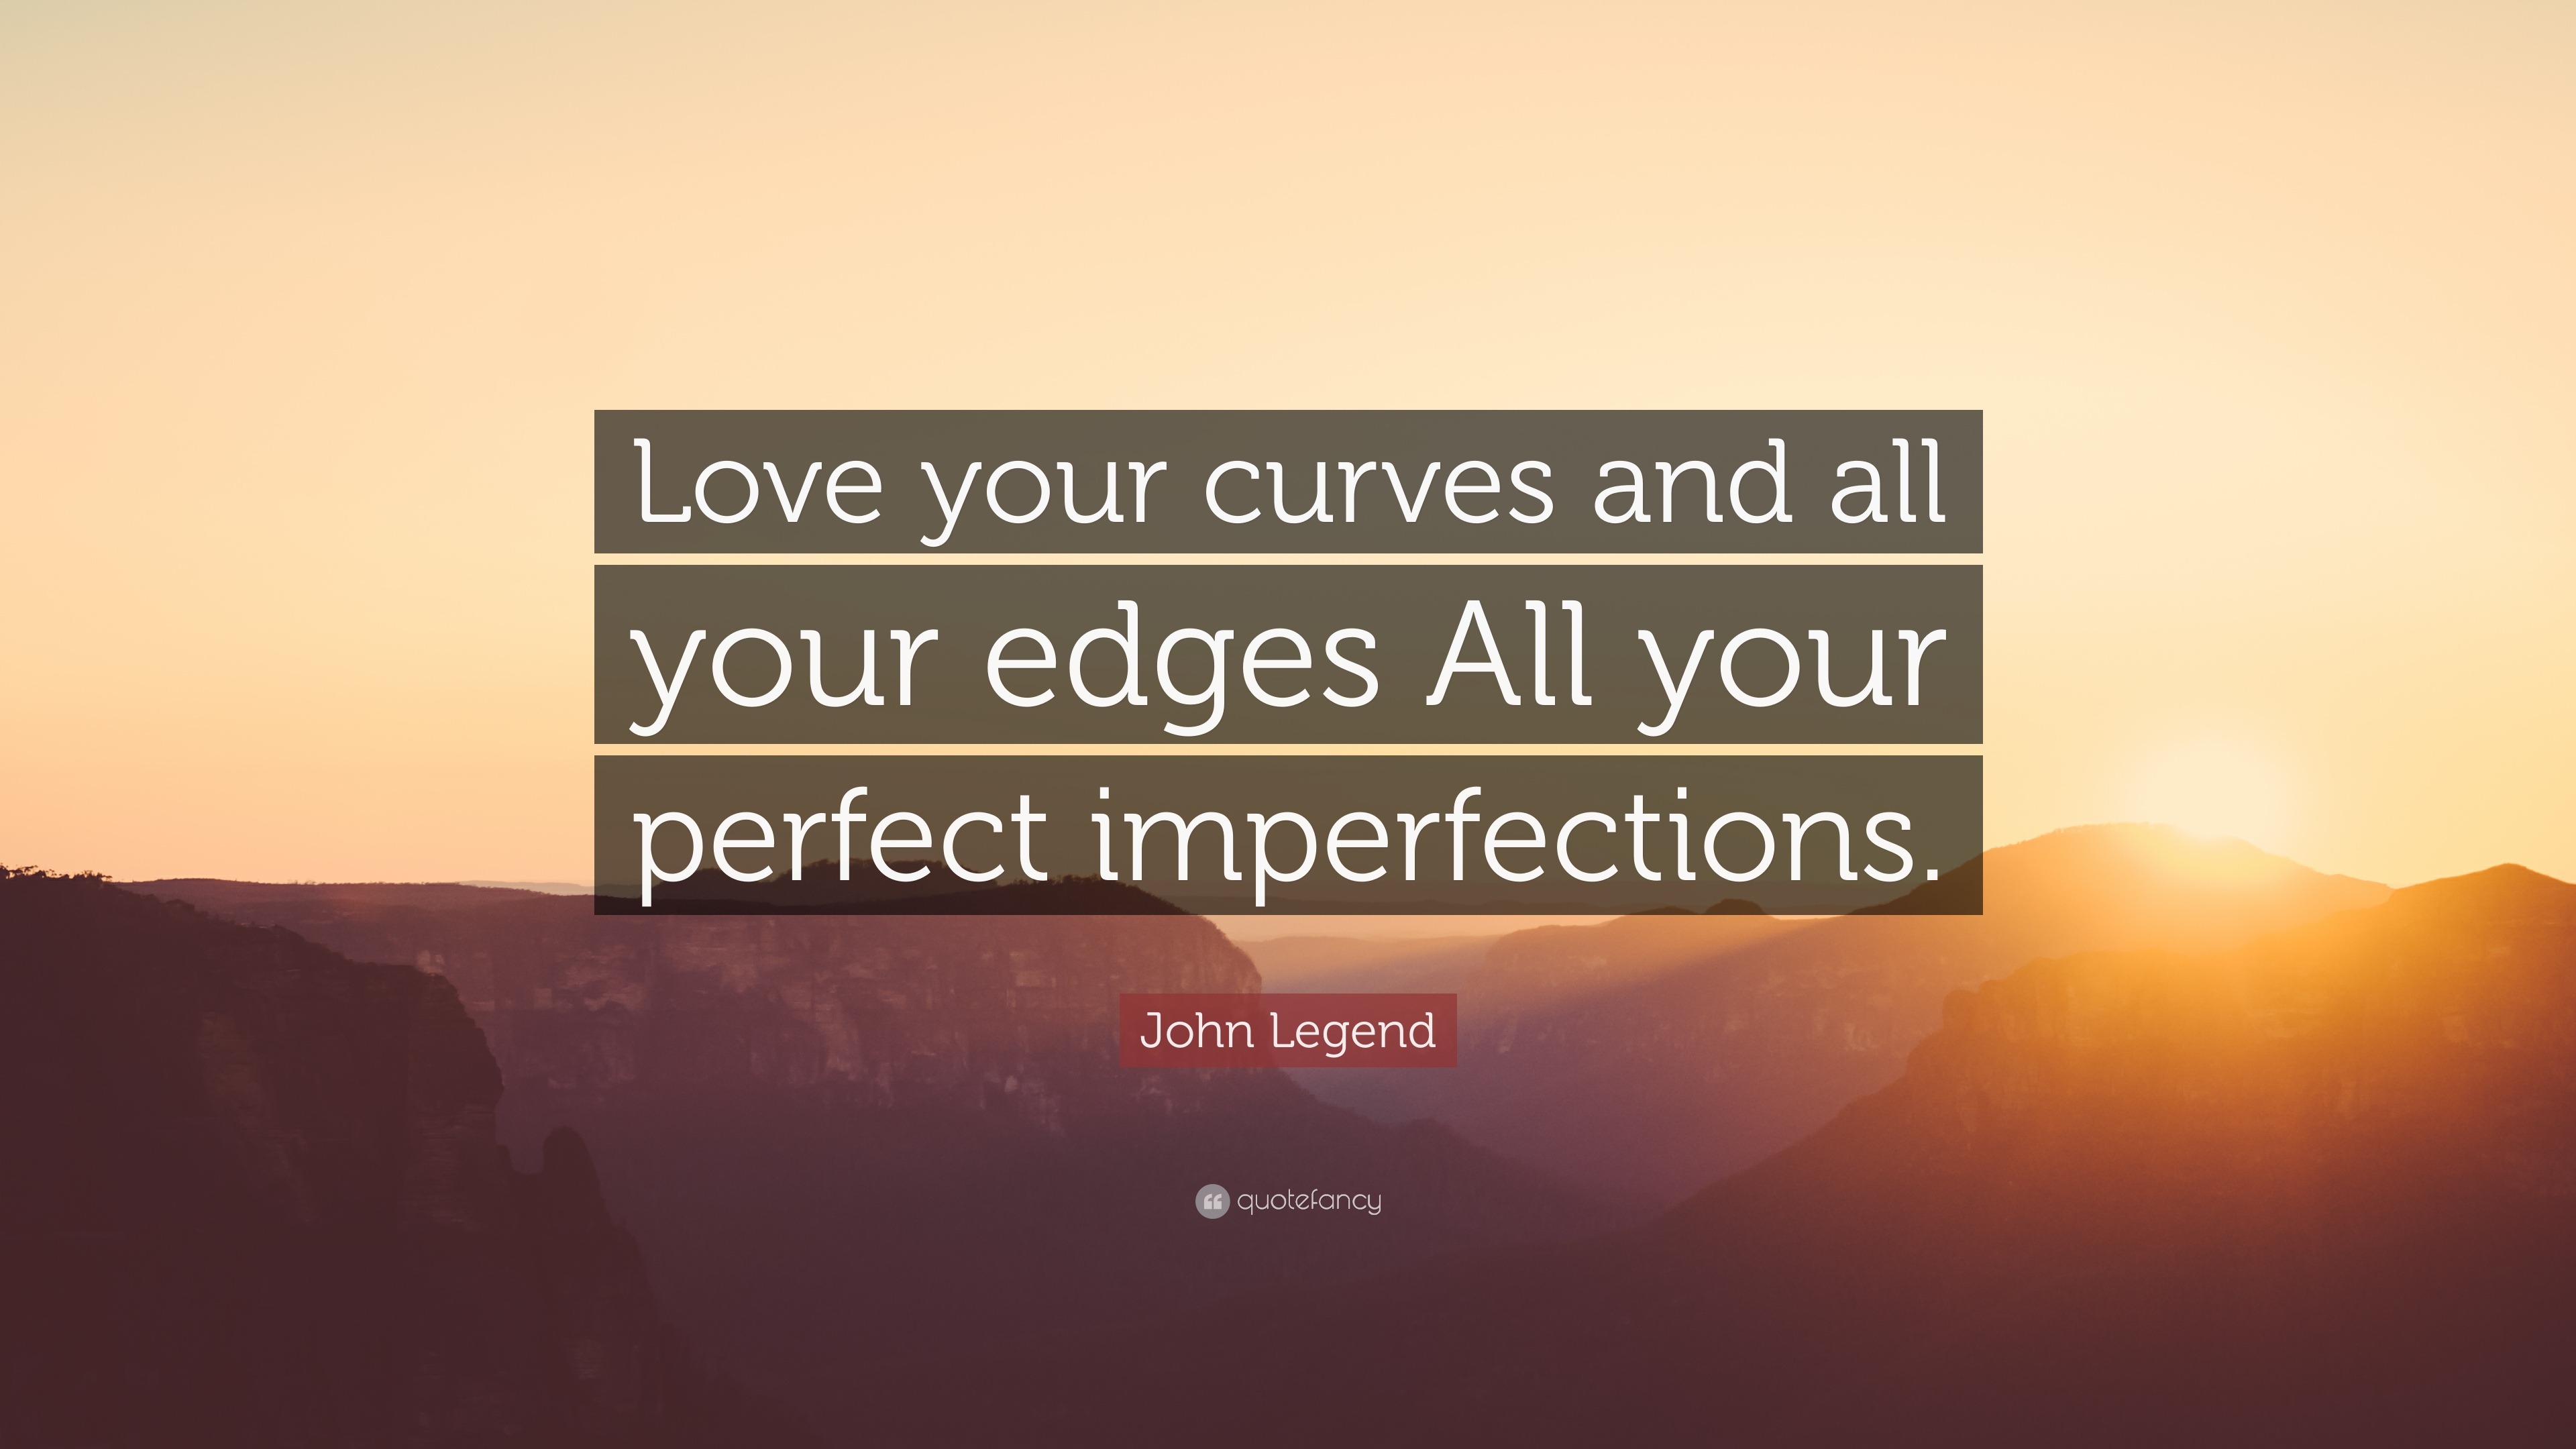 John Legend Quote: “Love your curves and all your edges ...